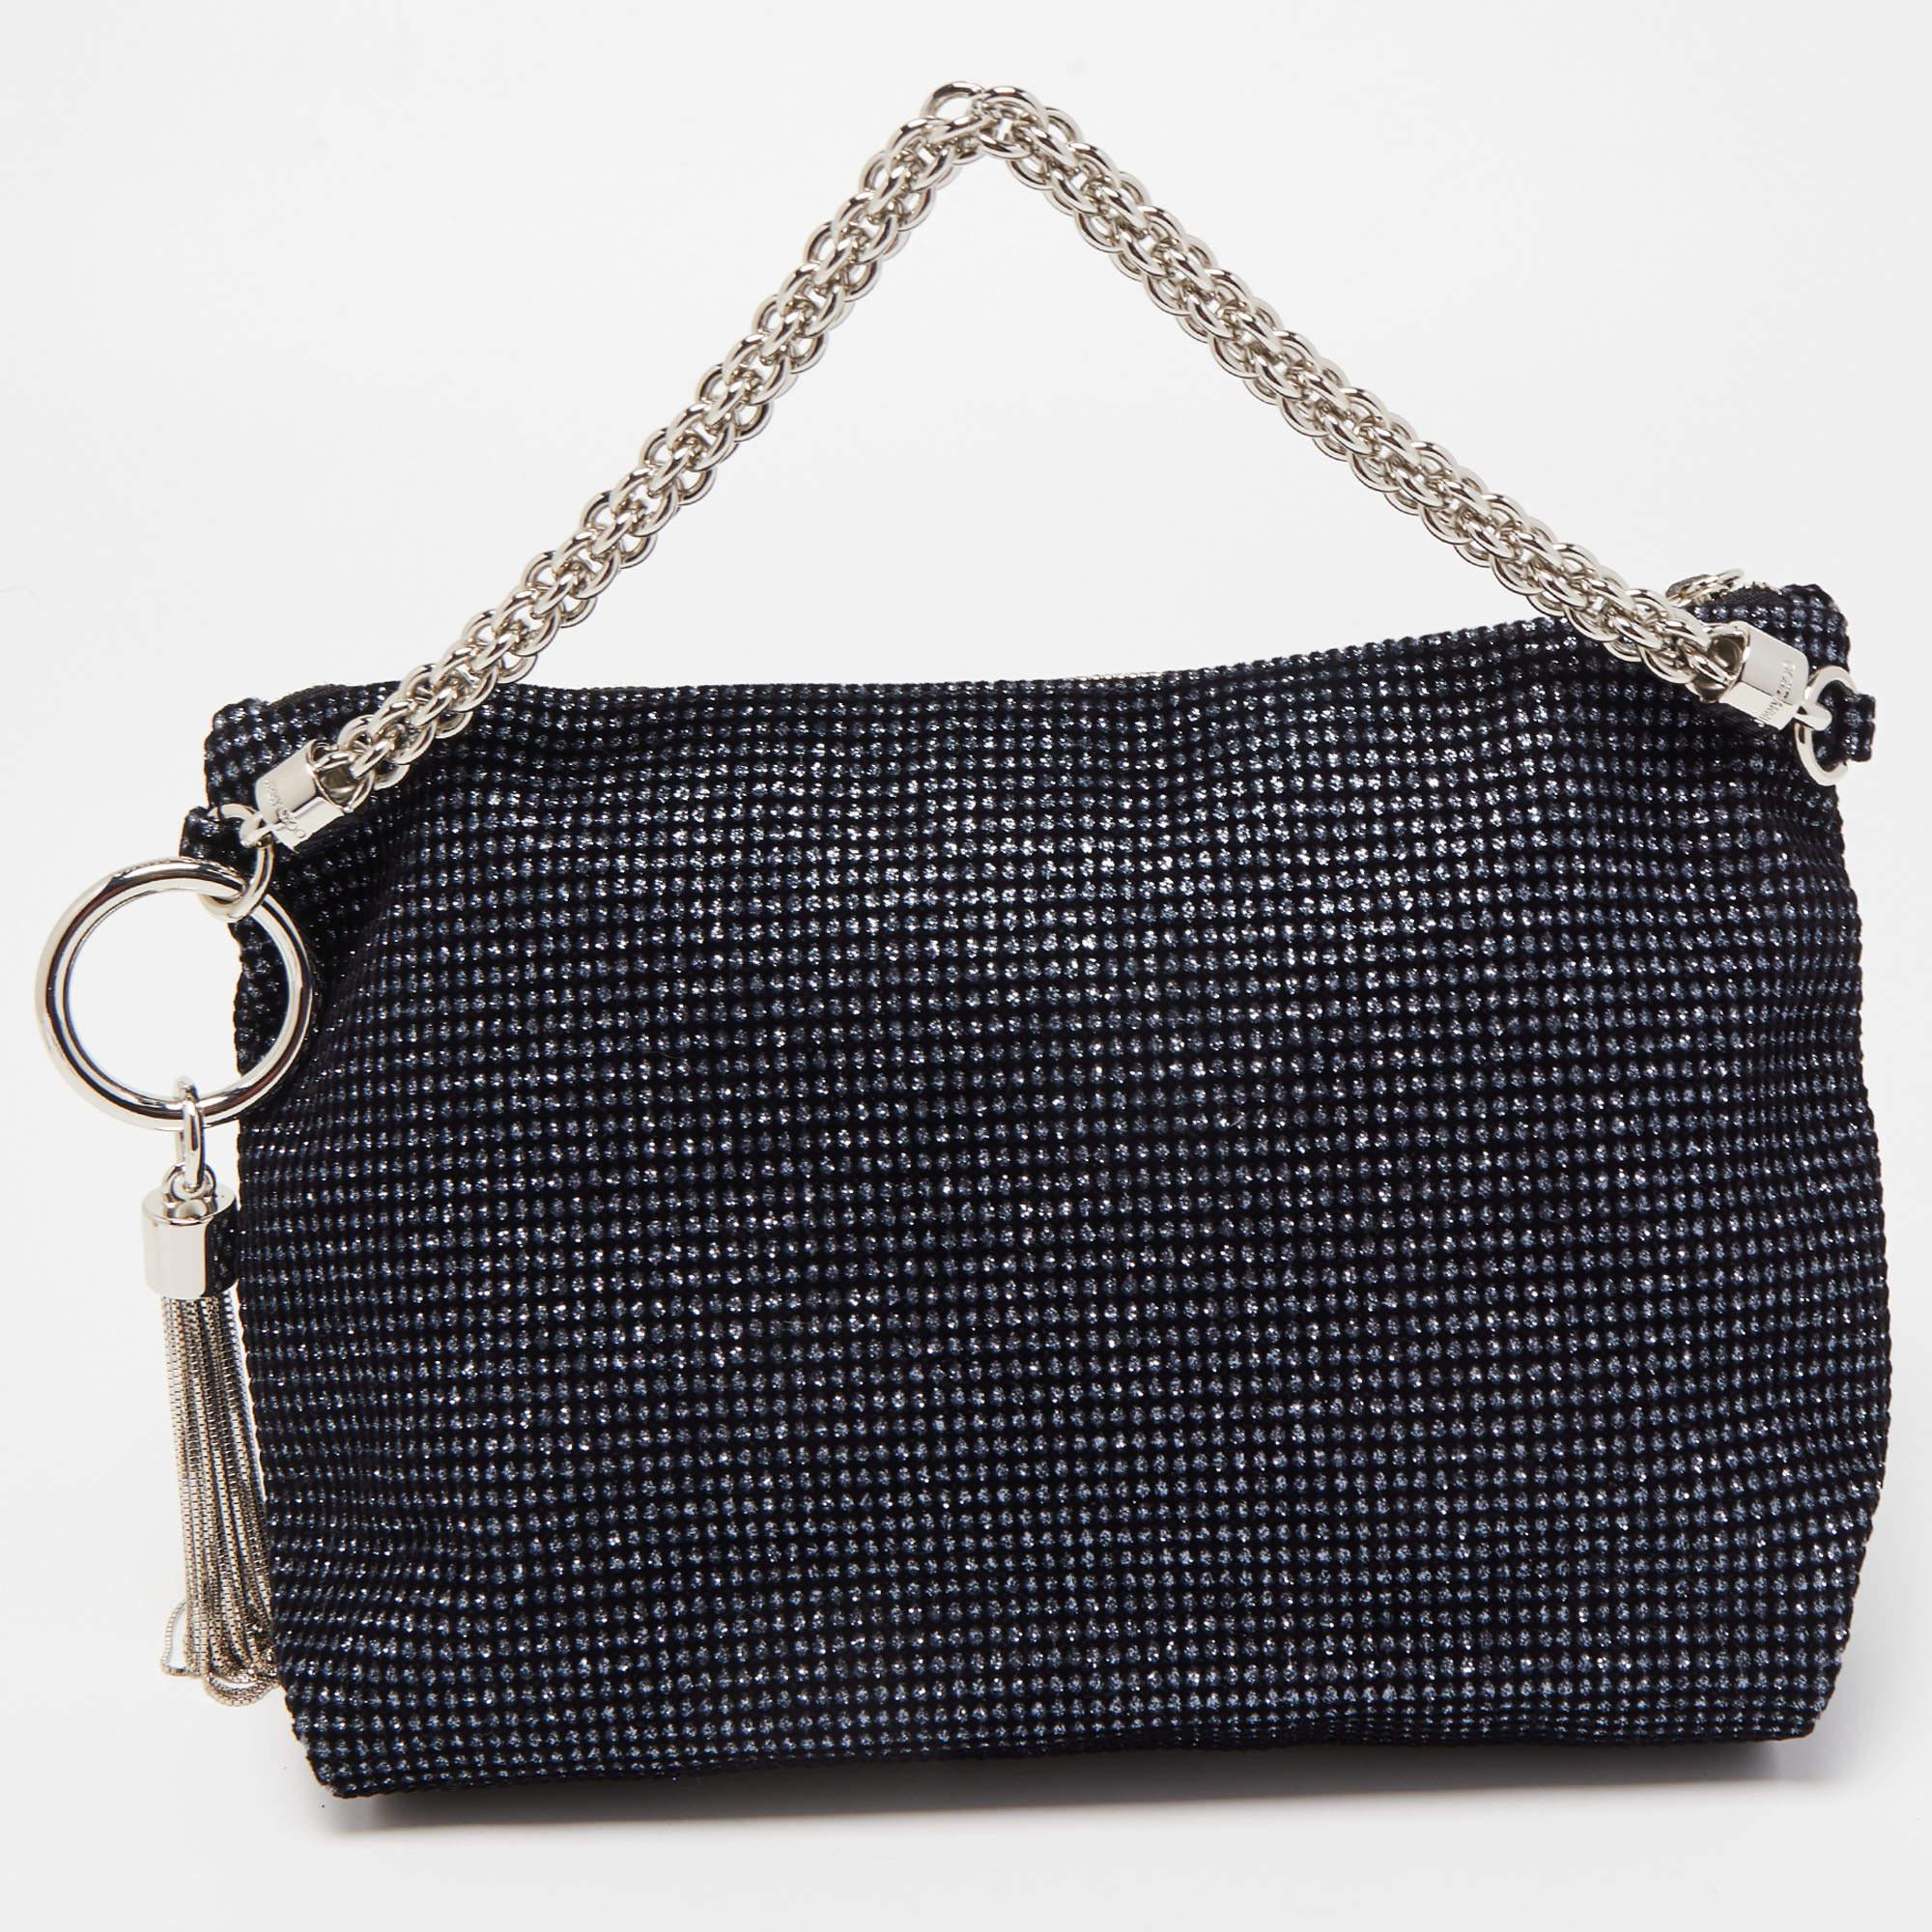 Just right for conveniently storing your valuables without weighing your look down, this Jimmy Choo clutch features a lurex fabric exterior with a chain handle. Carry it in your hand as a stylish day-to-evening accessory.

